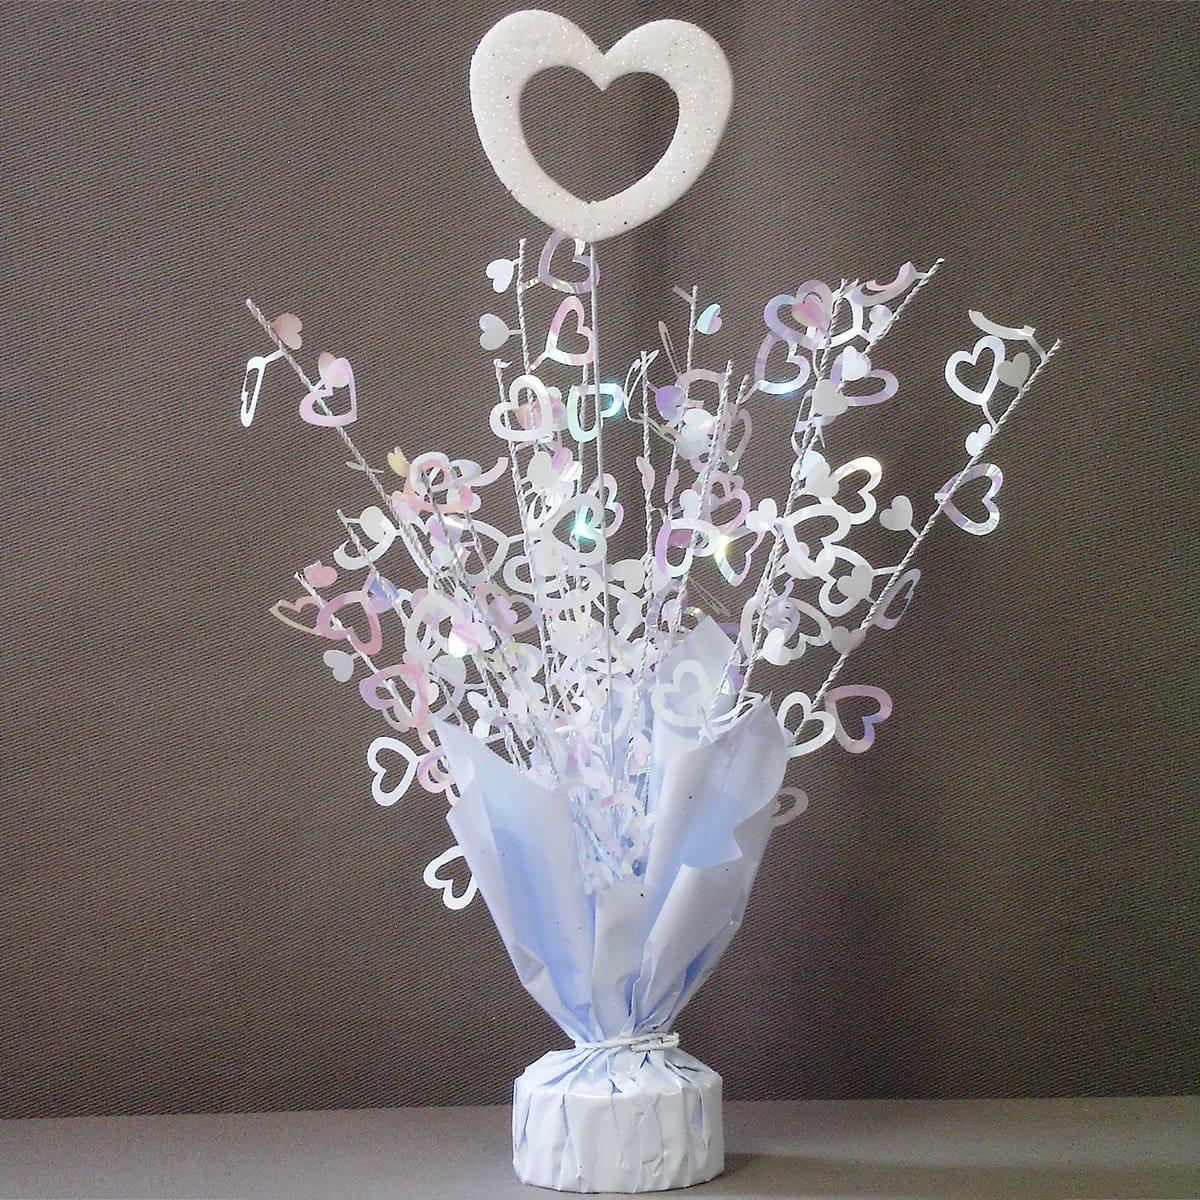 Buy Balloons Iridescent White Hearts Balloon Weight sold at Party Expert